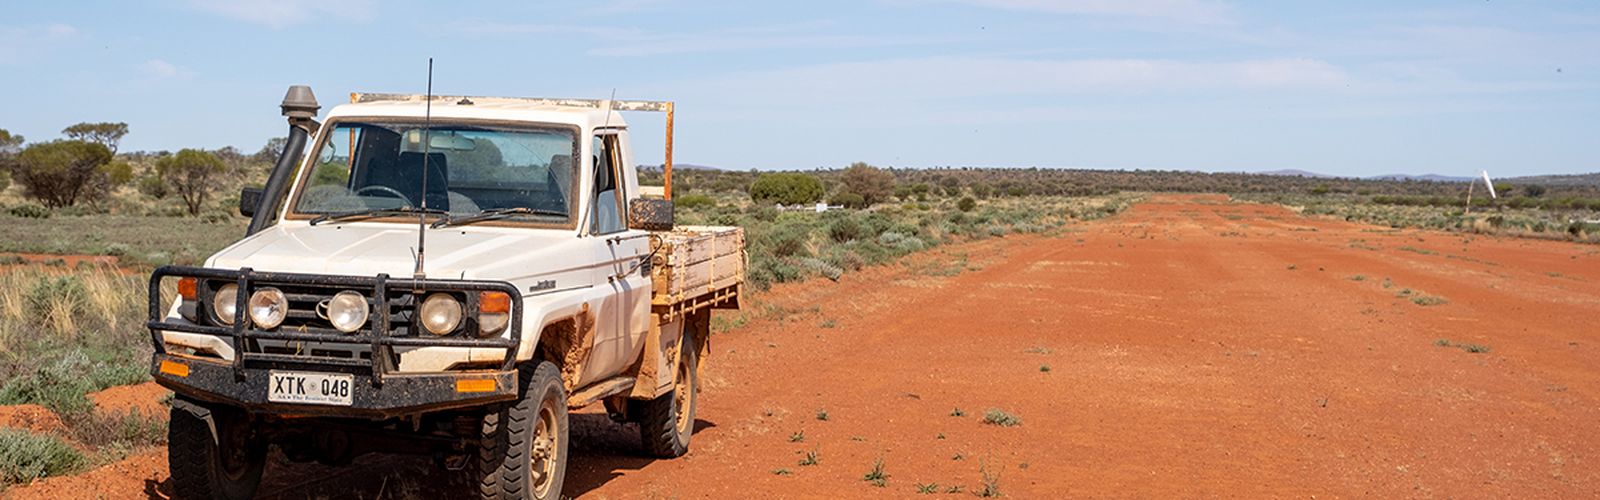 RFDS Australian Outback Survival Guide